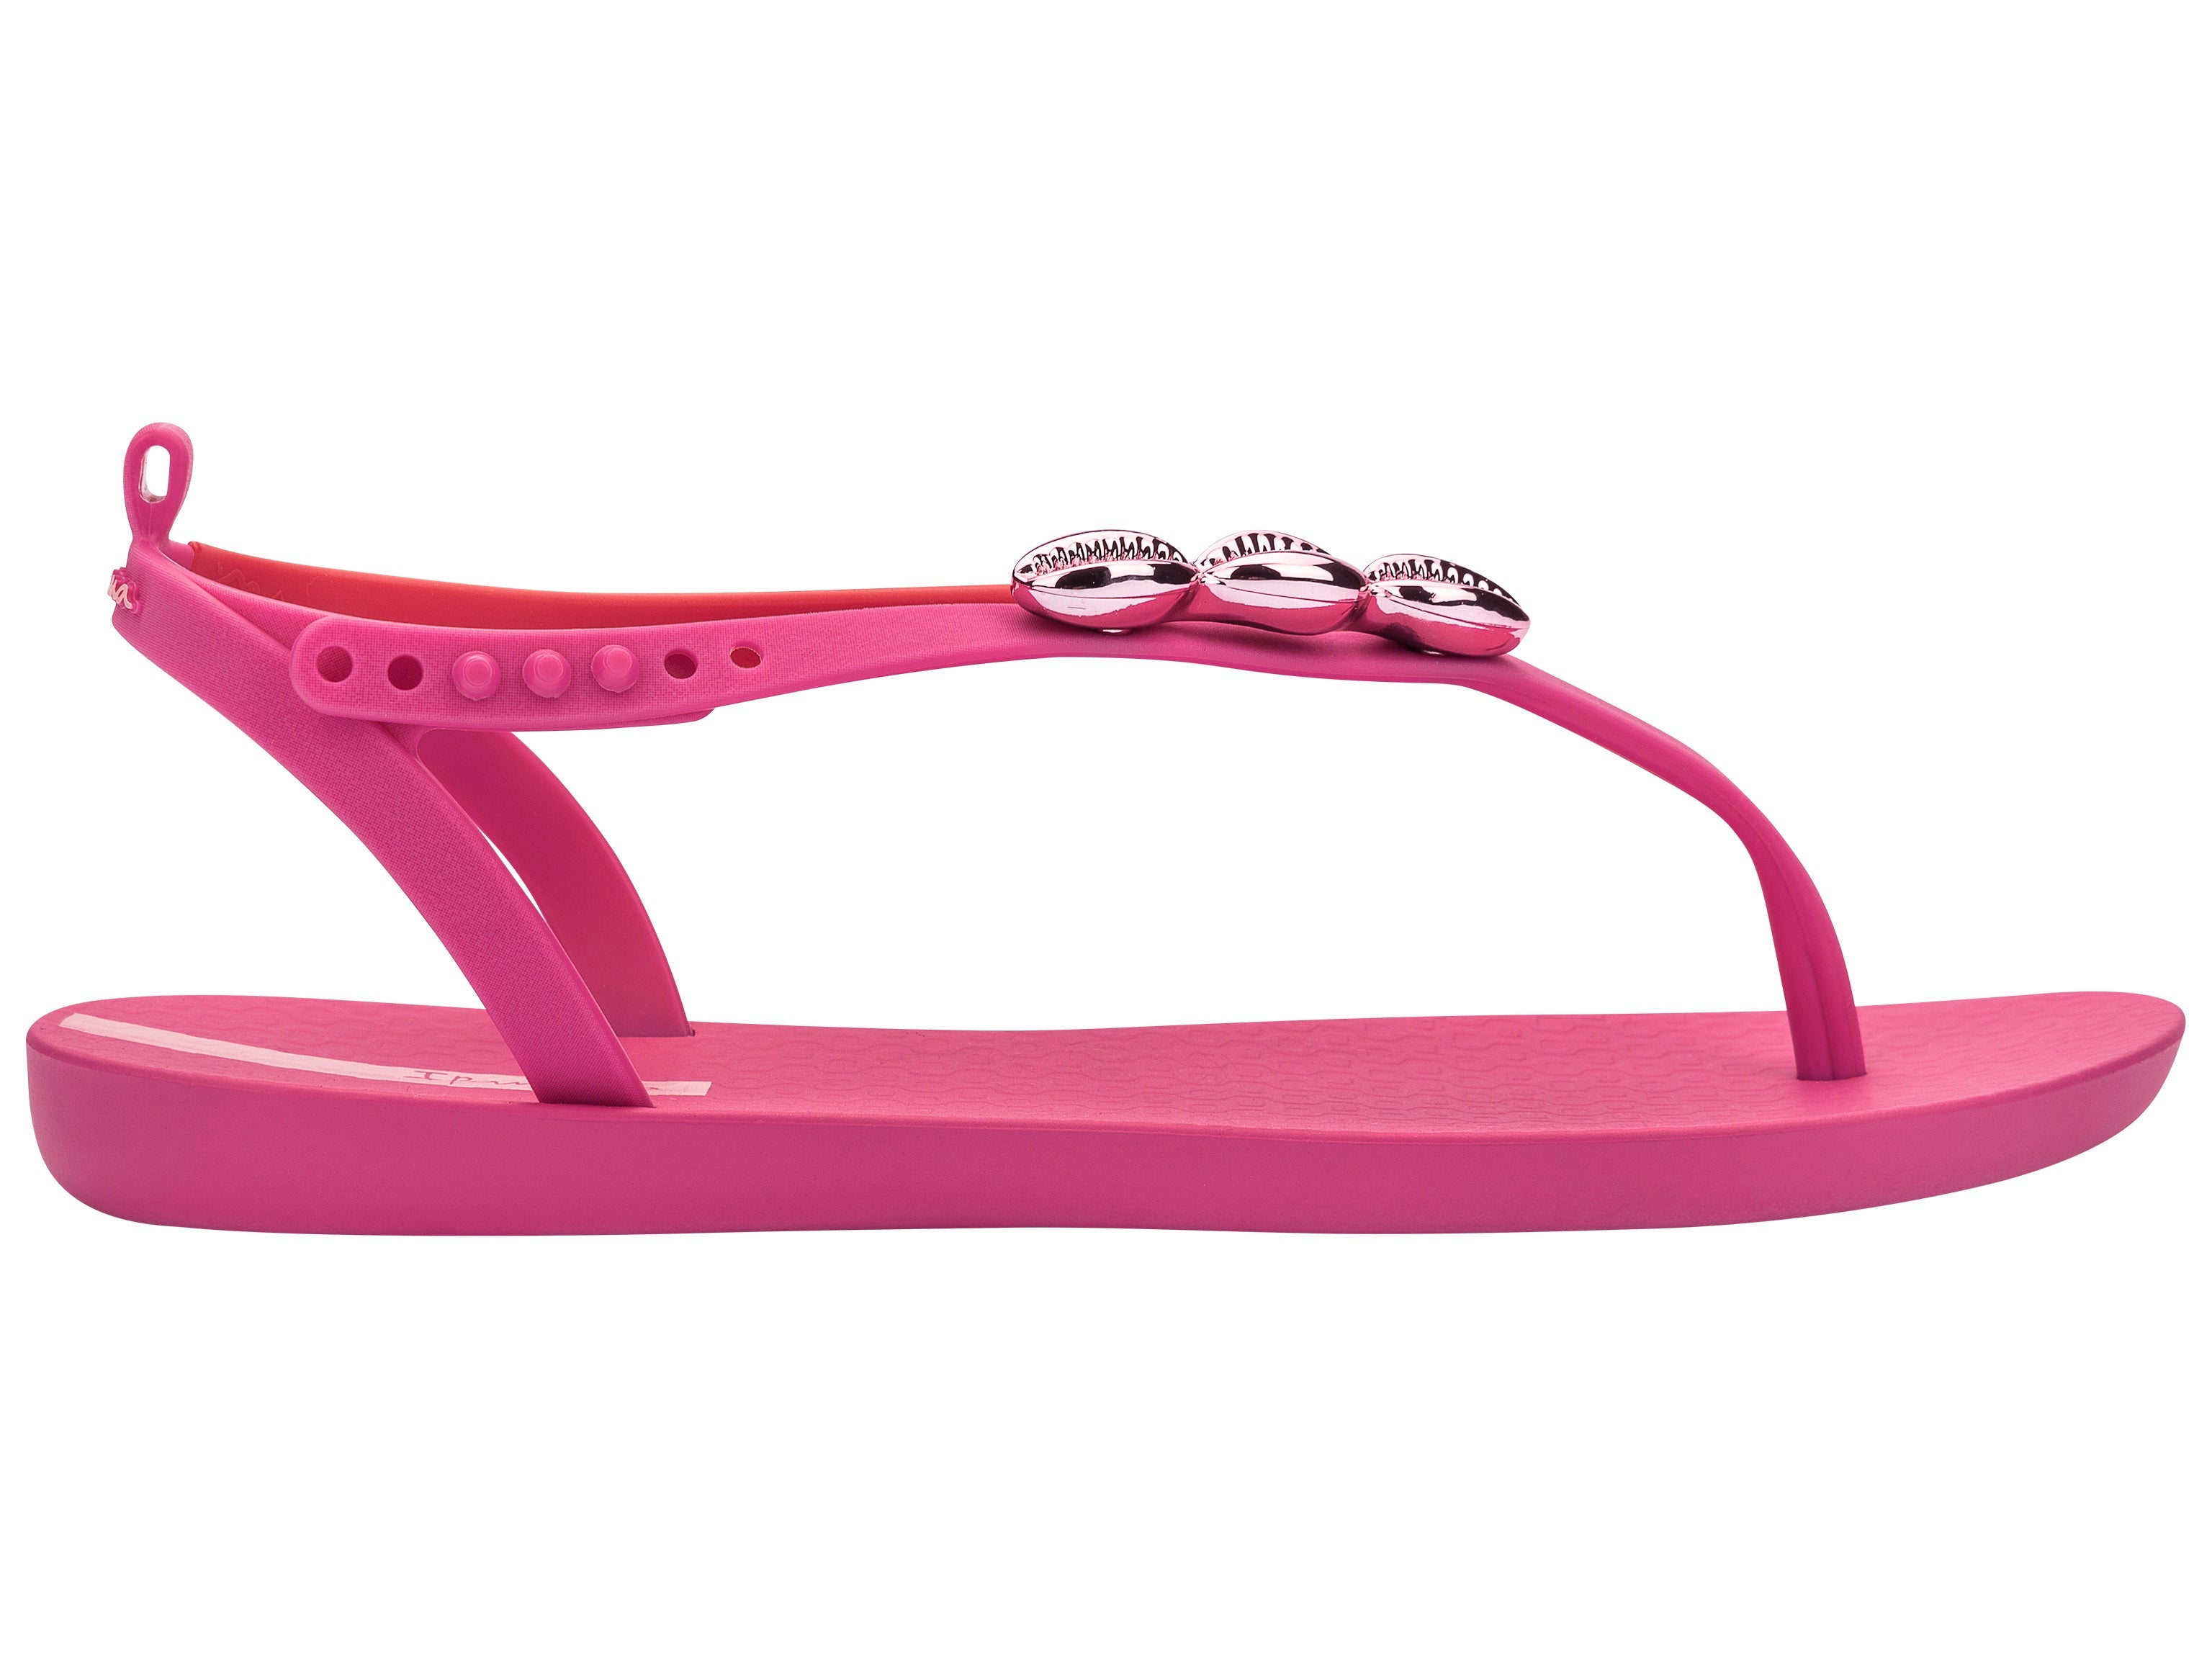 Outer side view of a pink Ipanema Salty women's sandal with 3 pink metallic shells on the strap.